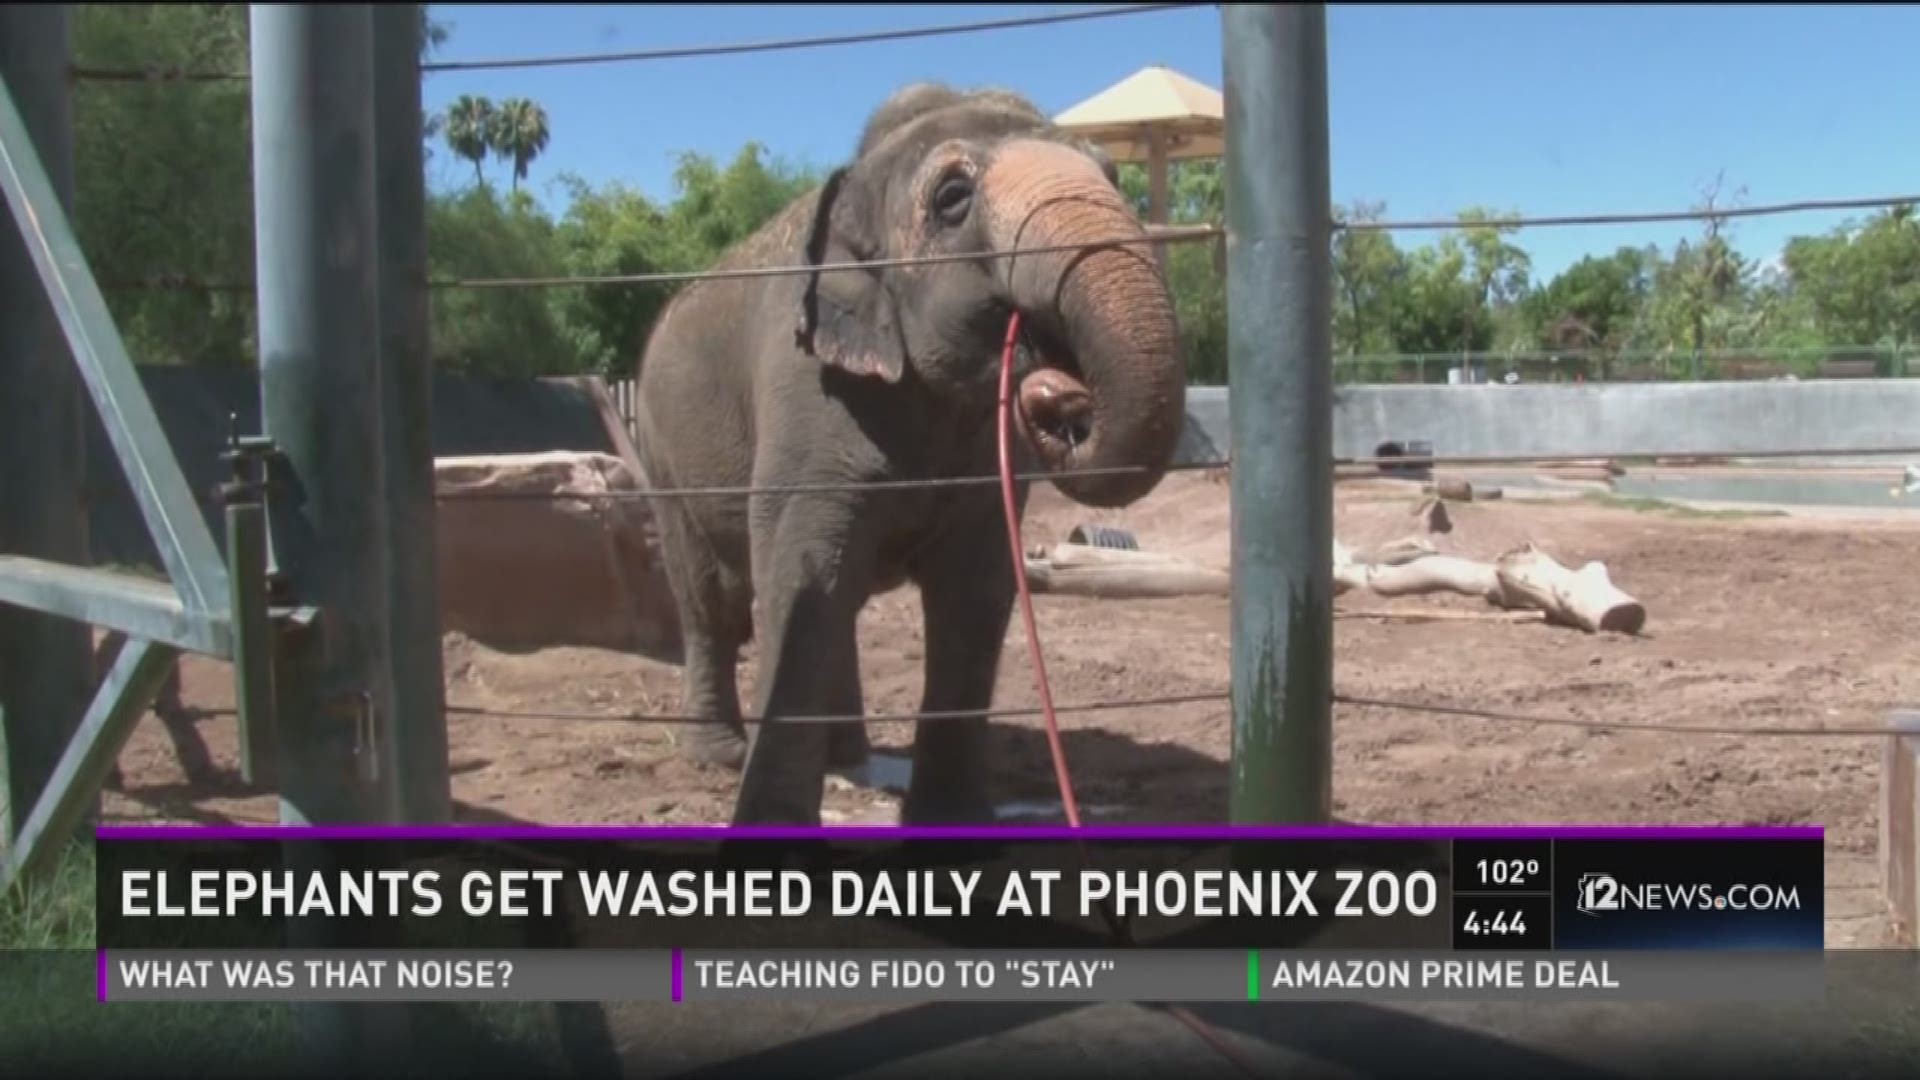 This weekend the Phoenix Zoo is appreciating their elephants.